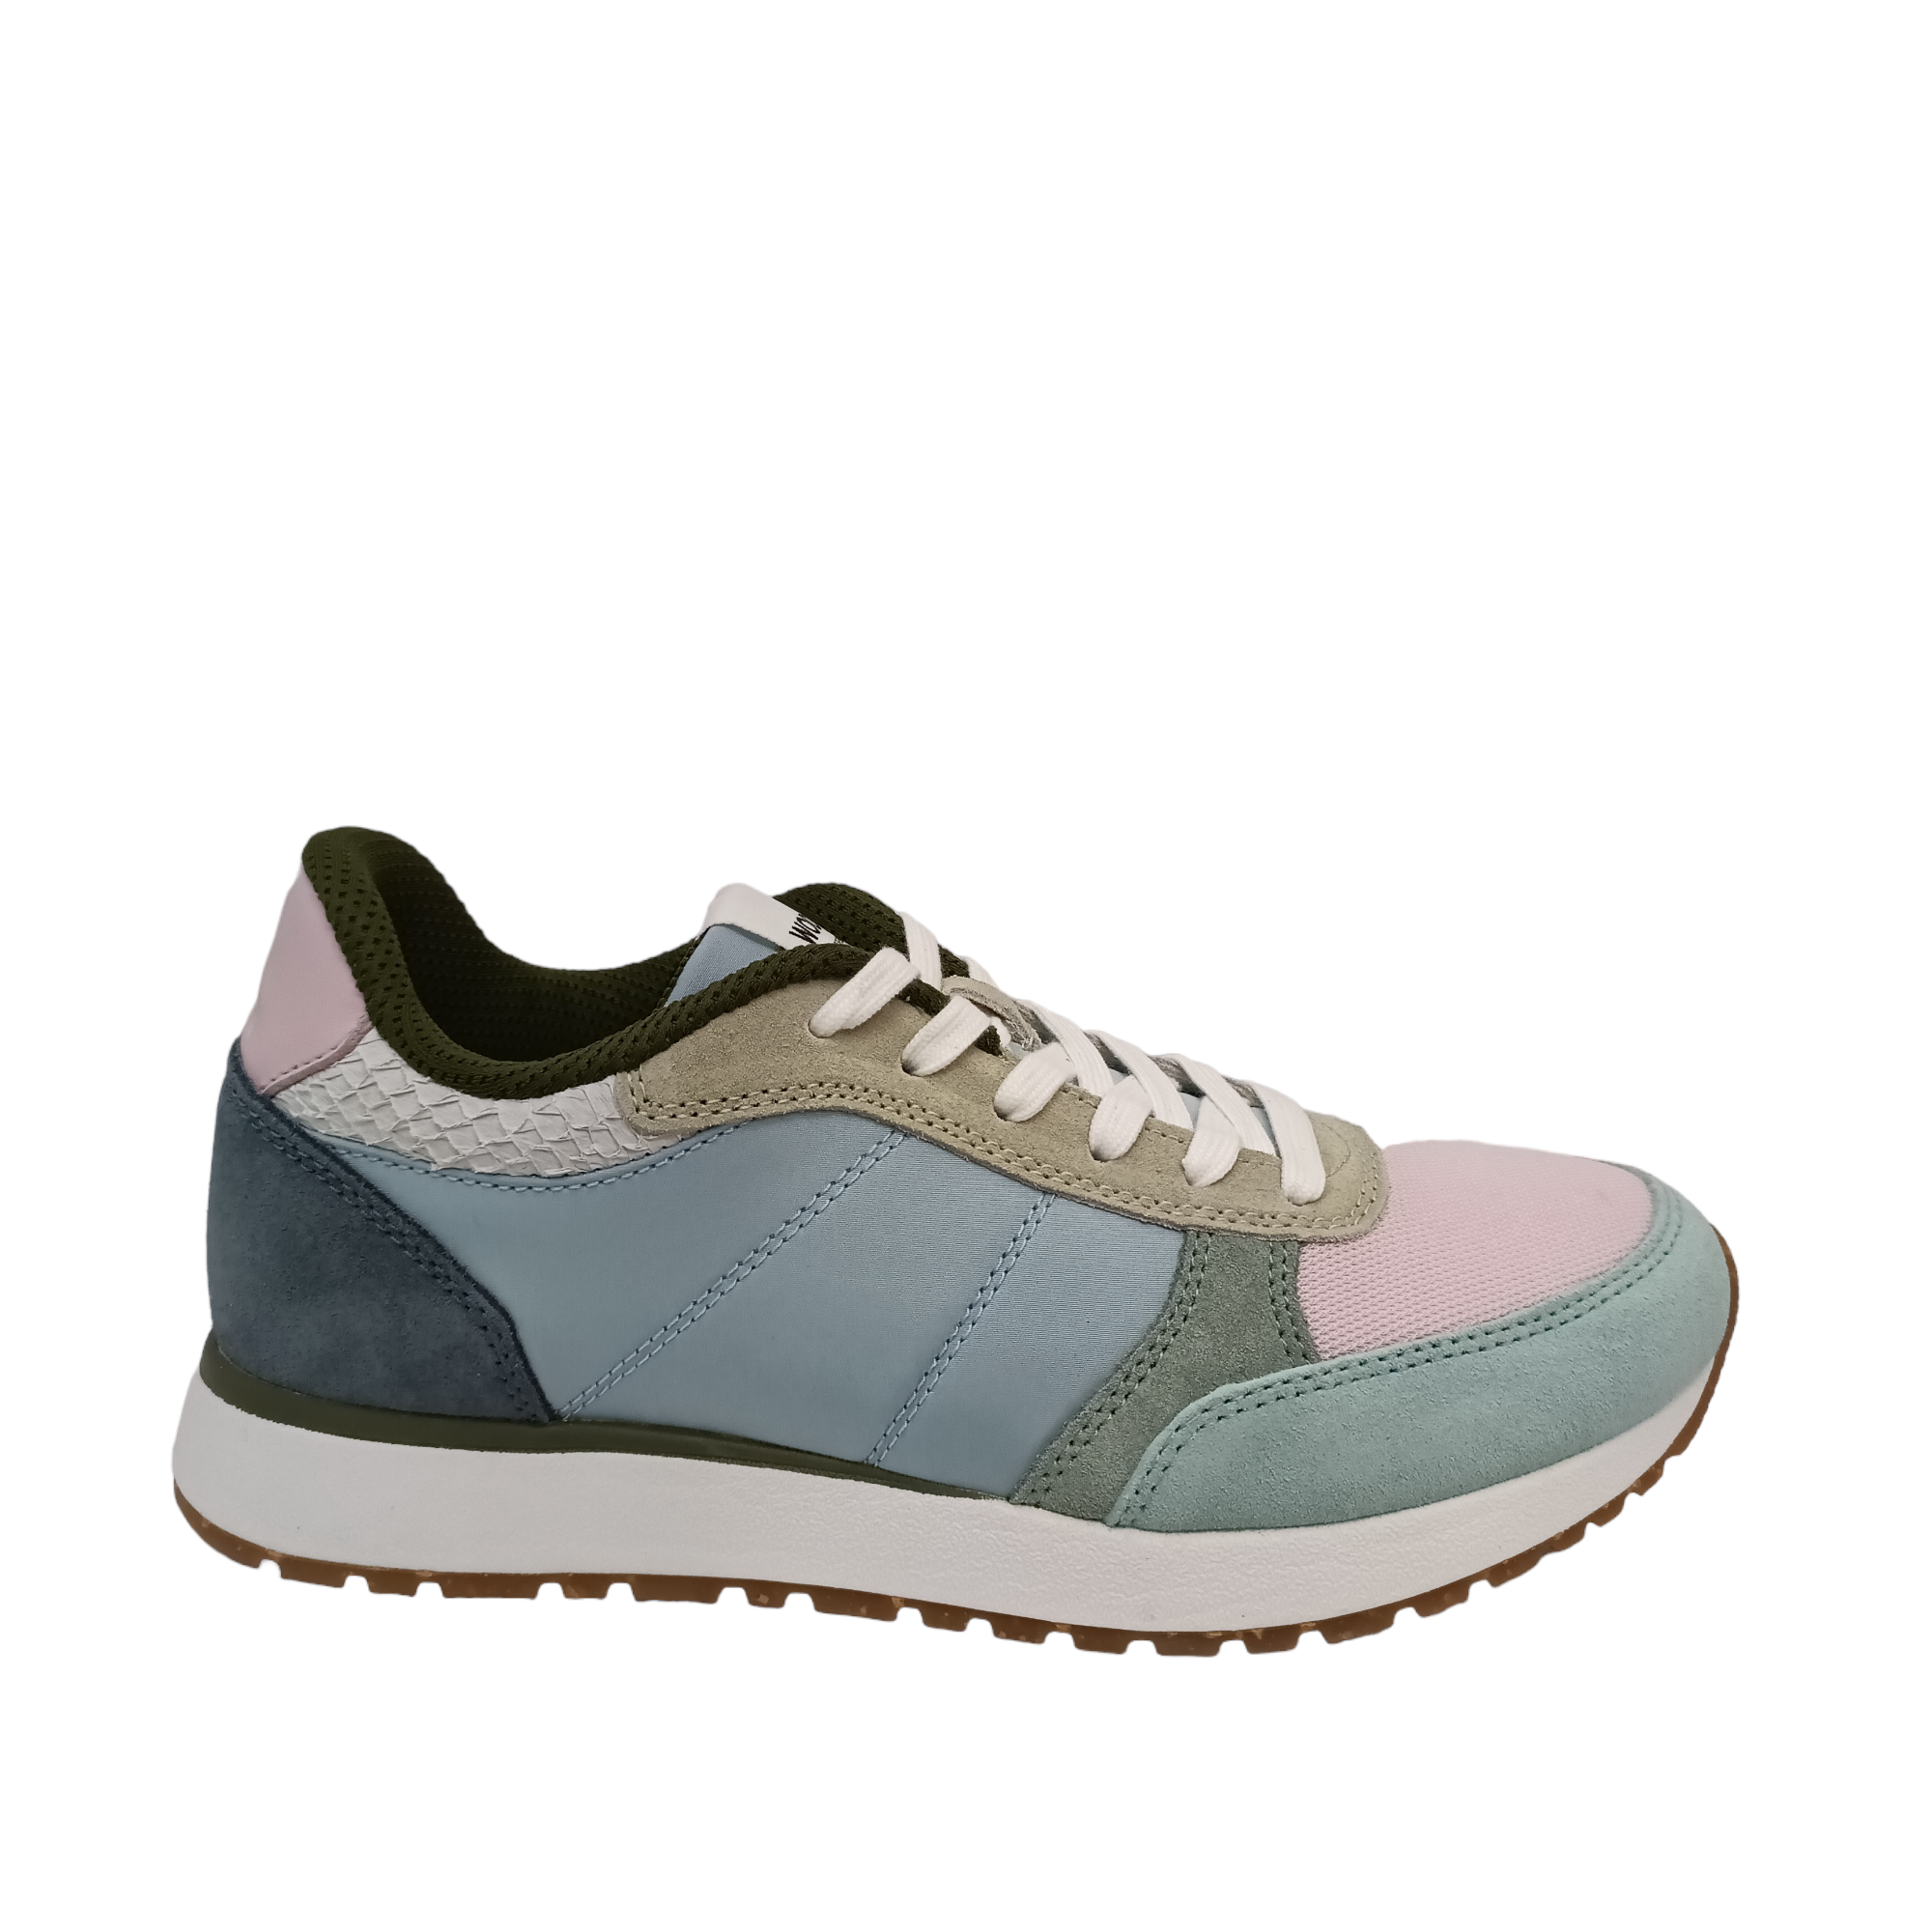 Shop Ronja Woden - with shoe&amp;me - from Woden - Sneaker - Sneaker, Winter, Womens - [collection]